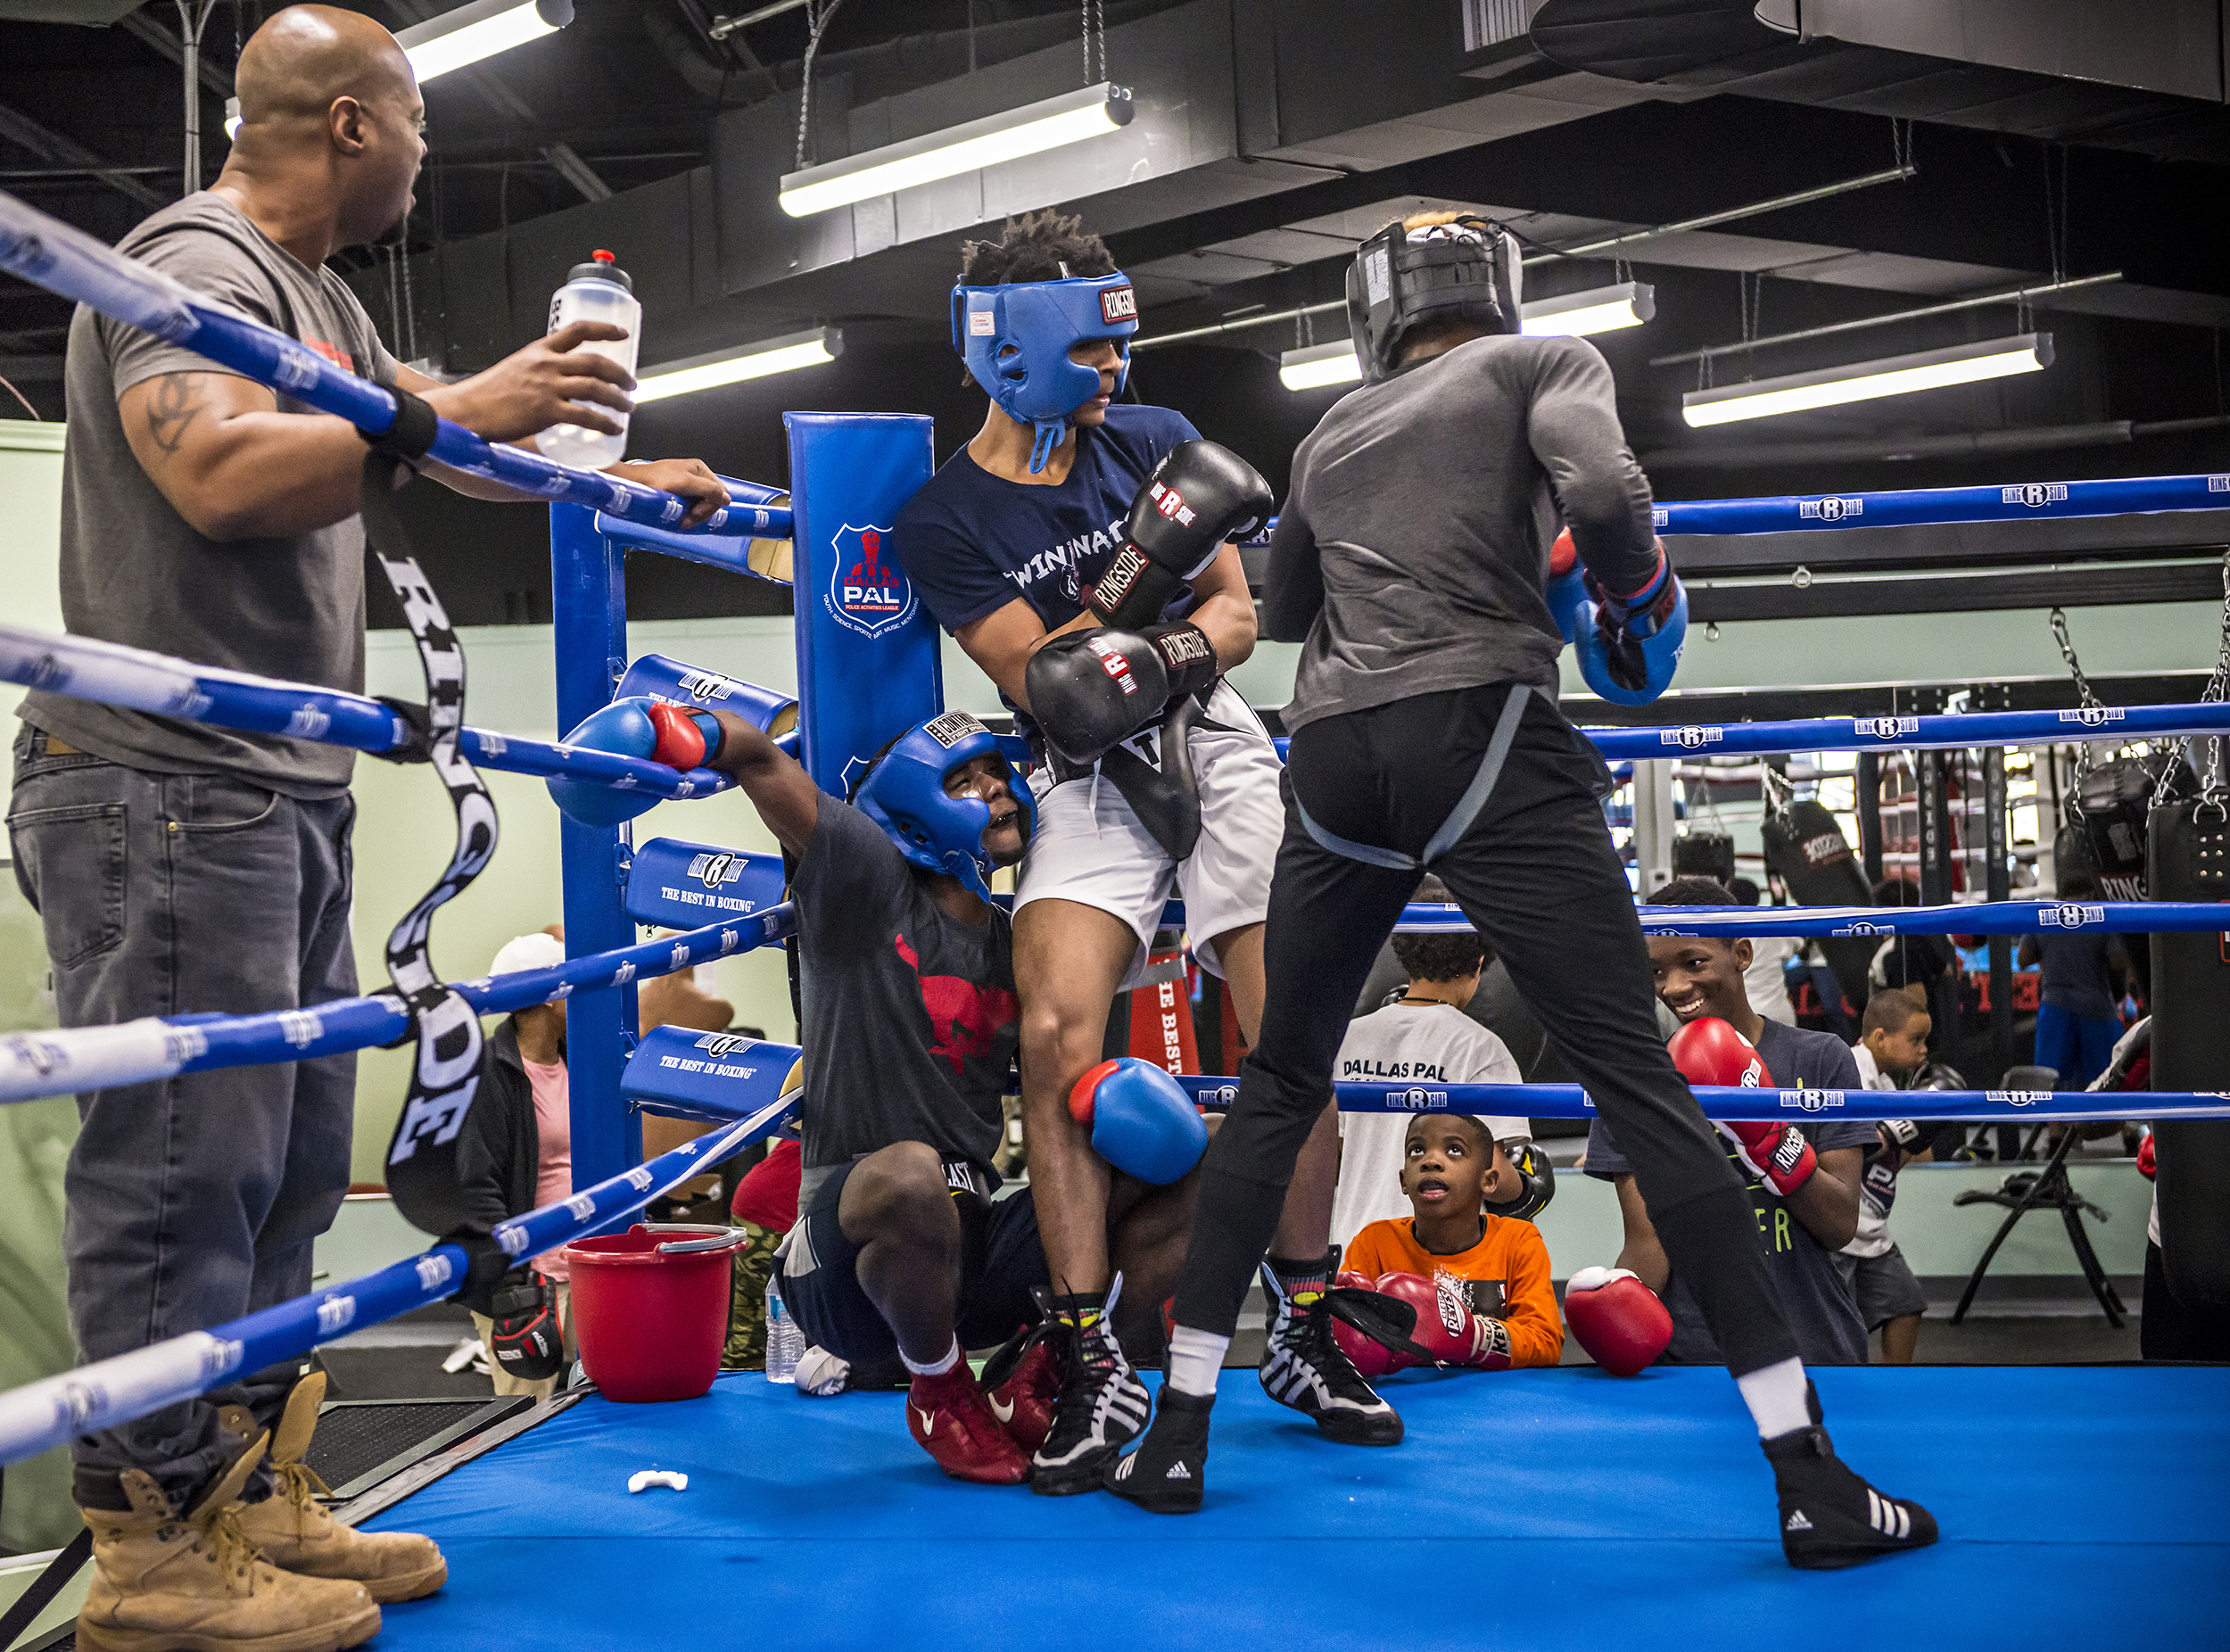  Teens spar at the North Lake Highlands Youth Boxing Gym in Dallas, TX.  The boxing gym opened in the crime-beleaguered Forest-Audelia neighborhood in 2017, with Dallas police officers training local children Monday through Friday.  Famed female boxe